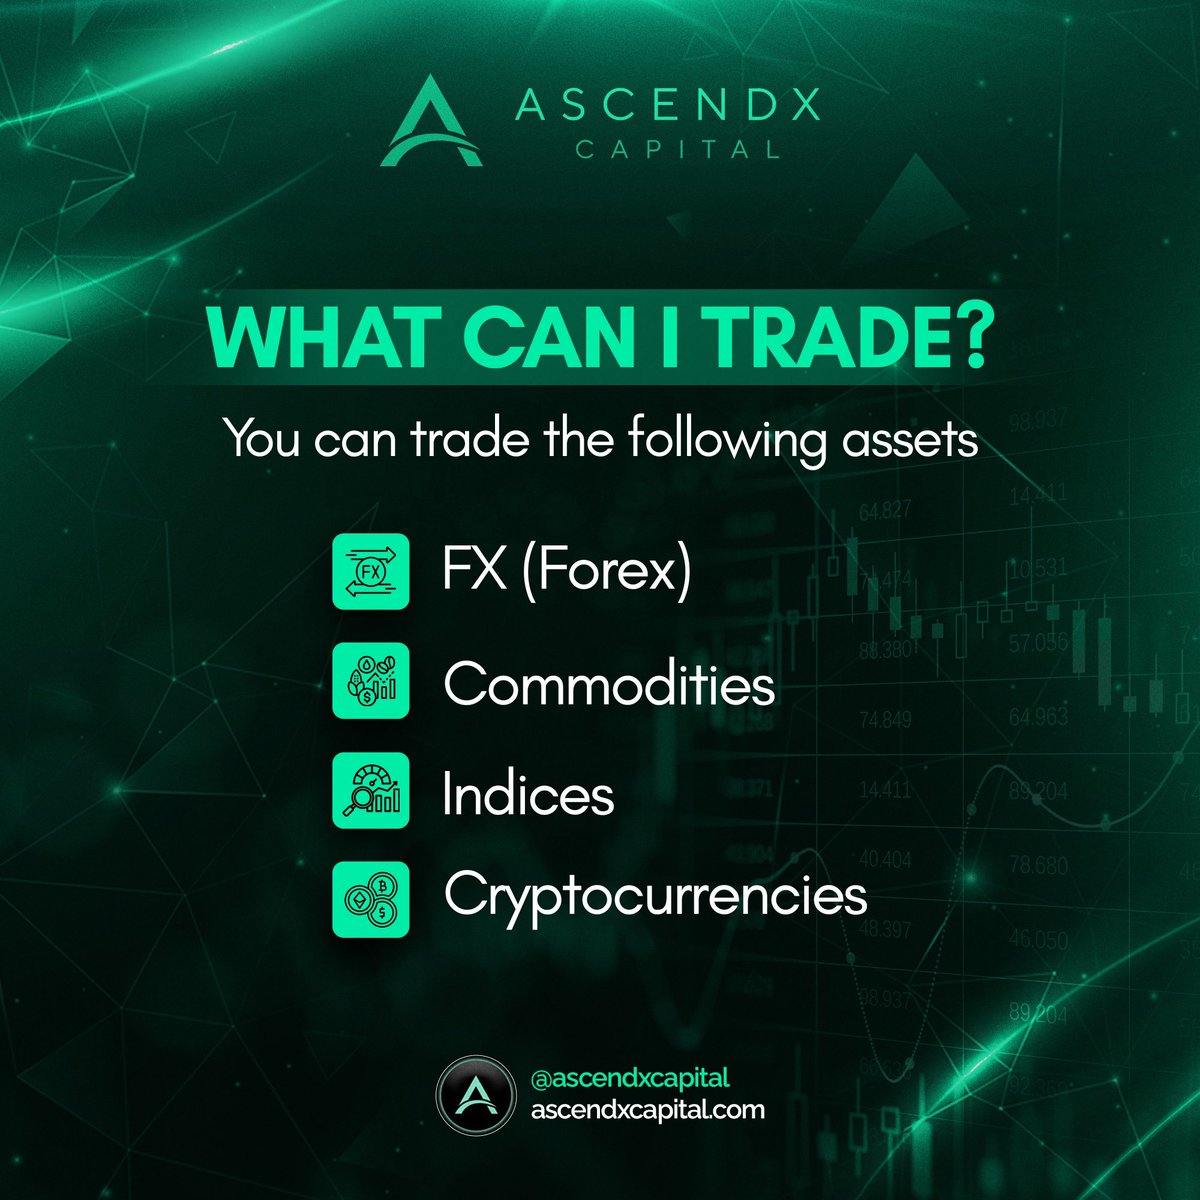 Ready to start your trading journey with Ascendx Capital? Here are the assets you can trade… Want to read more of our frequently asked questions? Visit ascendxcapital.com/faq. #trading #onlinetrading #forex #crypto #cryptocurrency